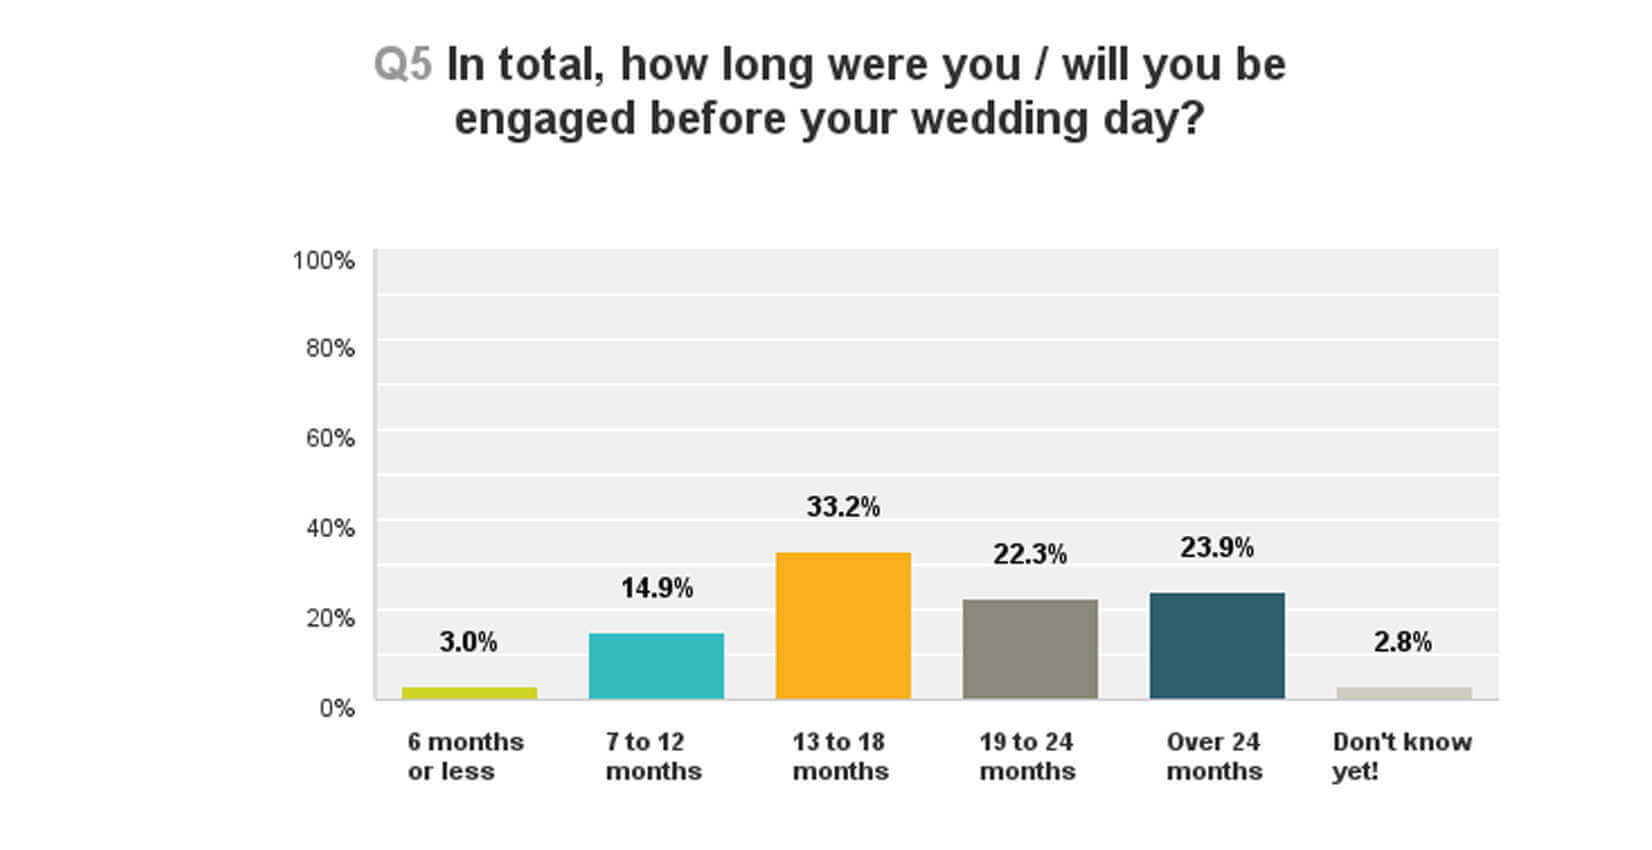 How long were you engaged